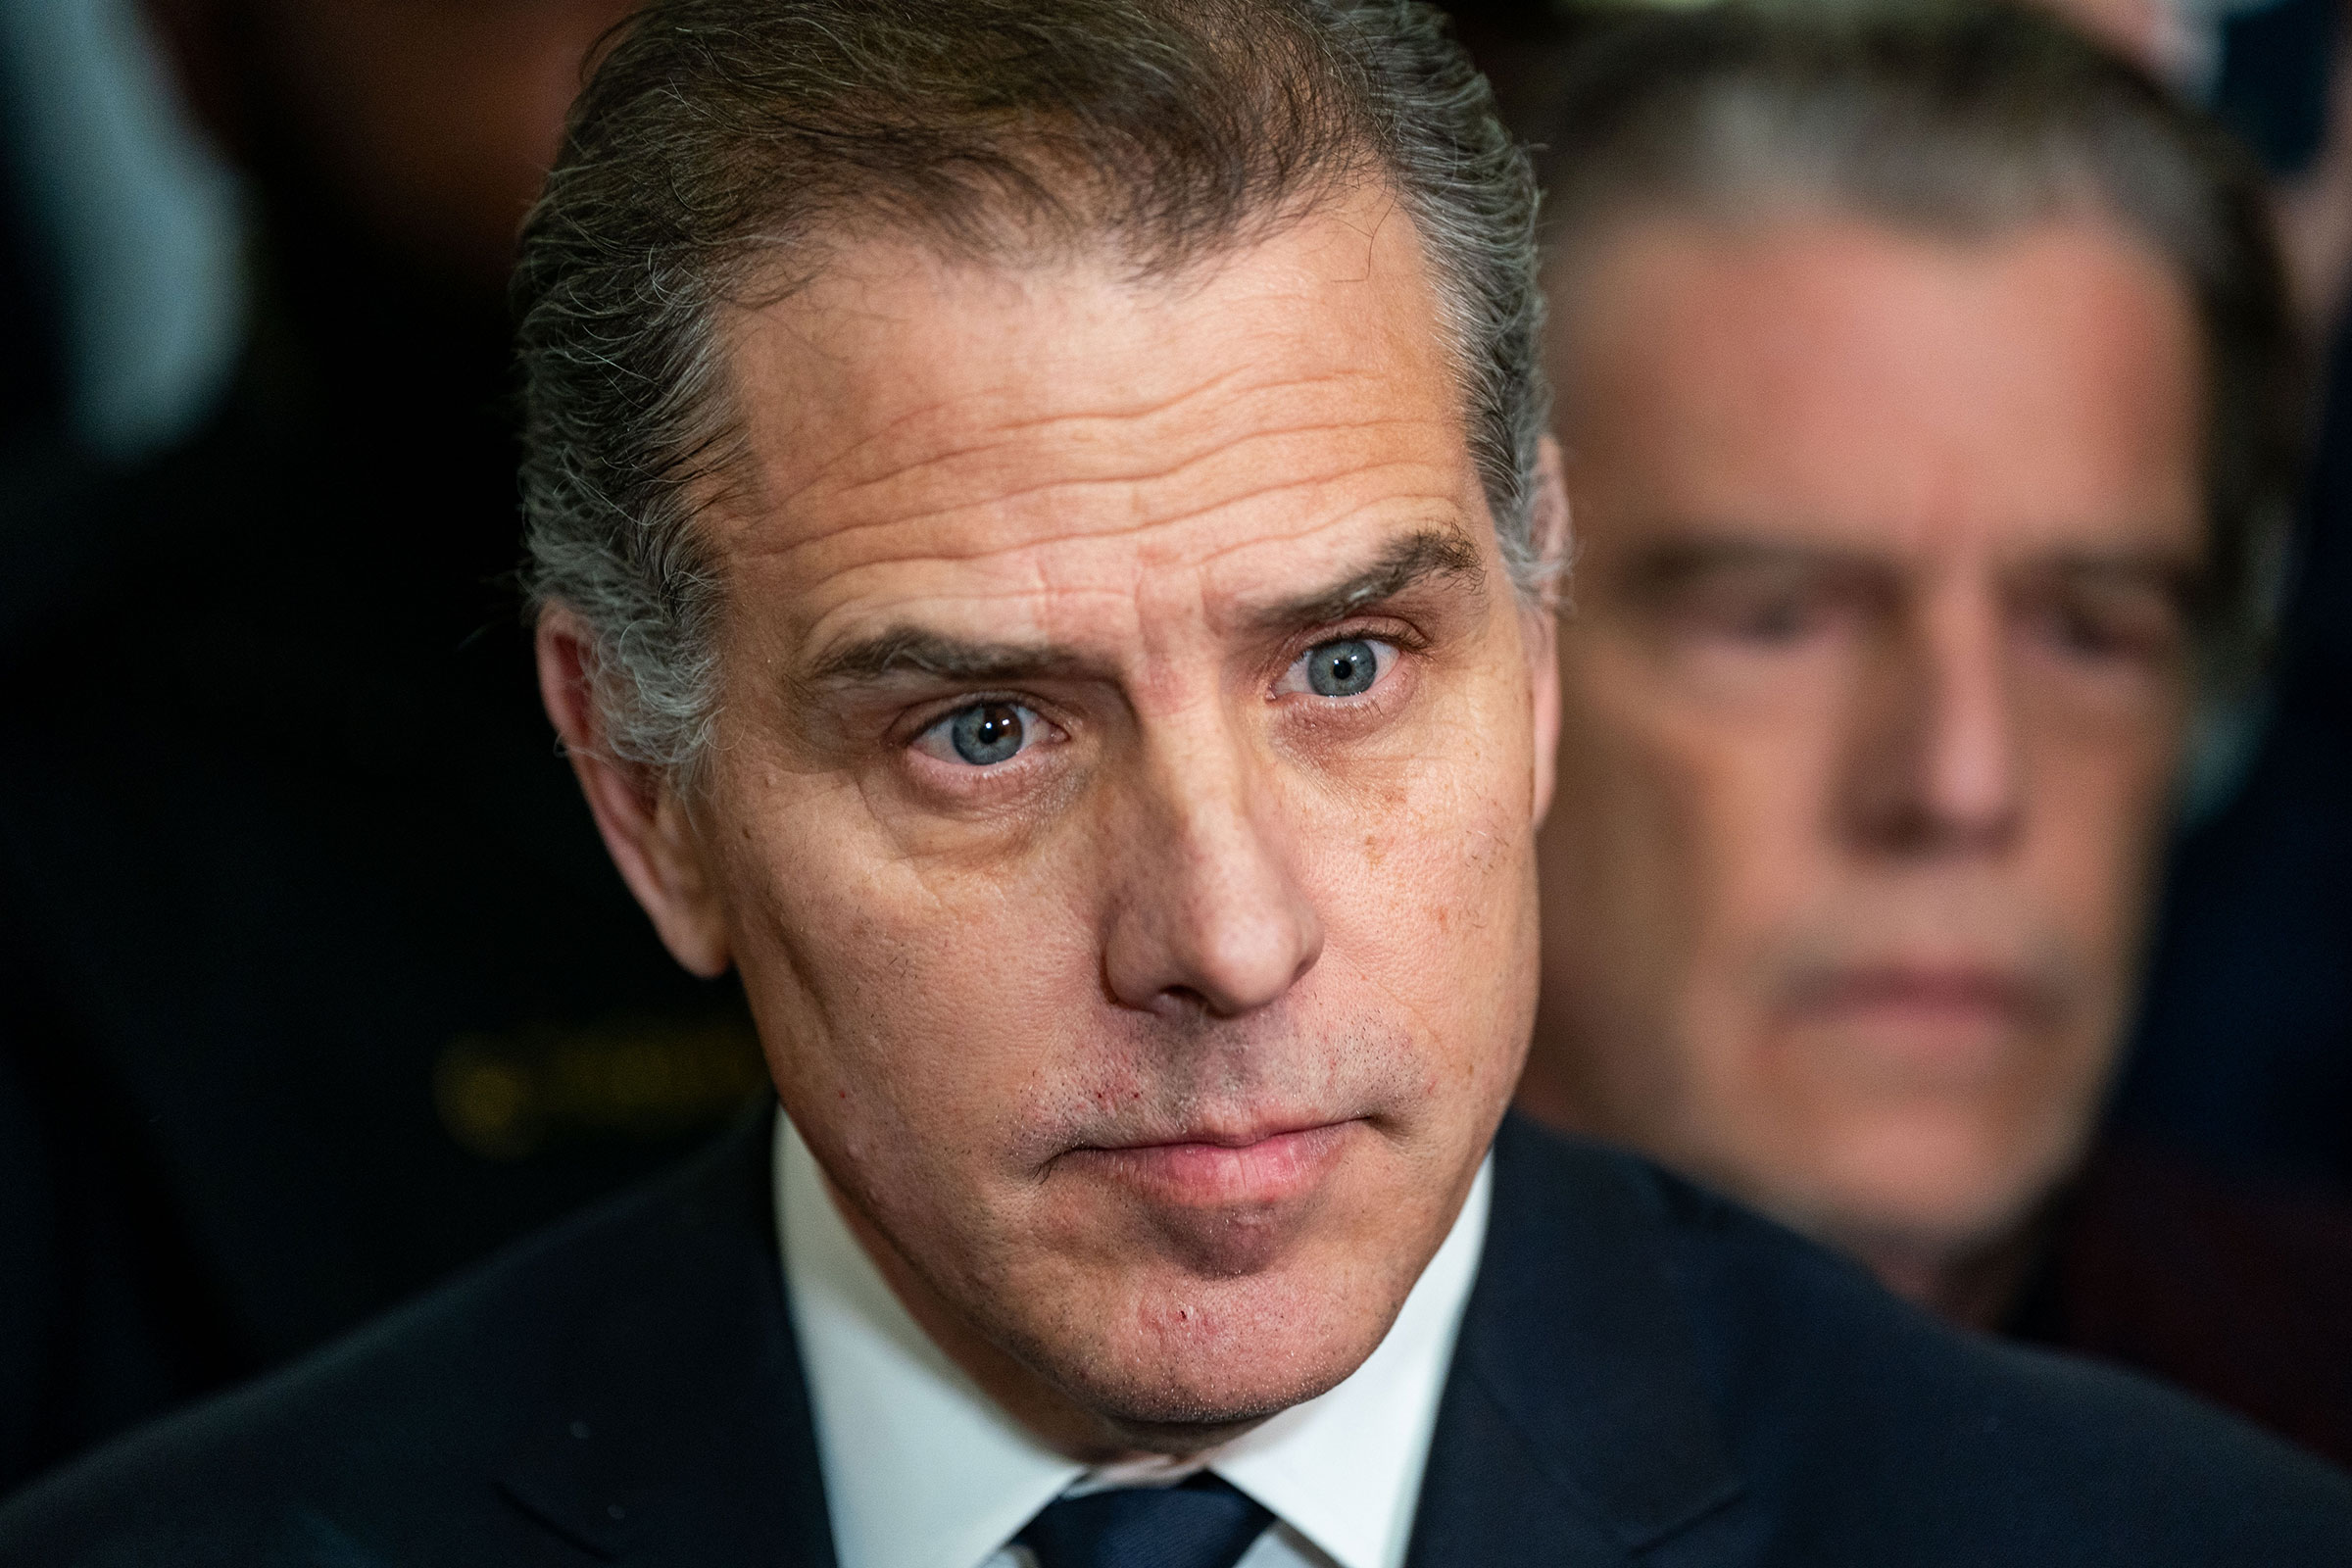 Hunter Biden listens as his lawyer Abbe Lowell speaks to the press outside a House Oversight Committee meeting on January 10, in Washington, DC.